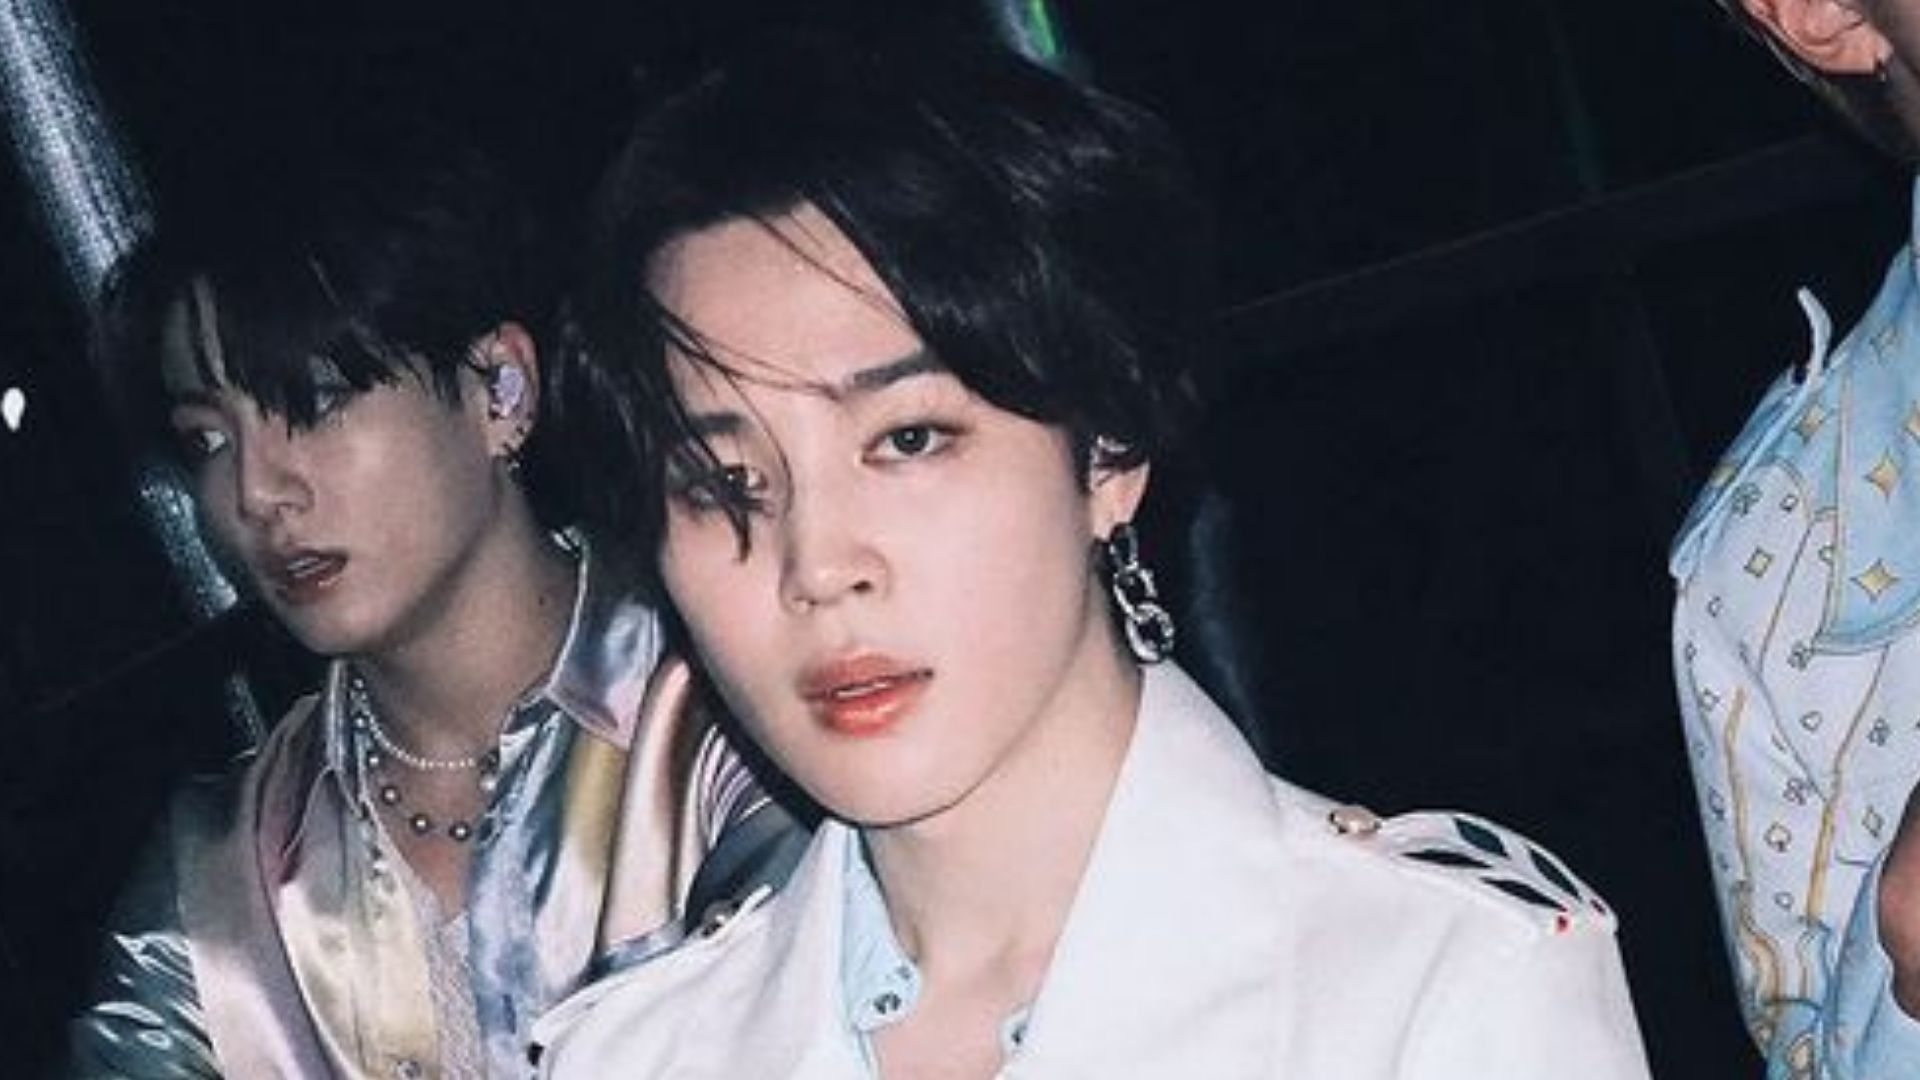 BTS Park Jimin Photos, Fashion Style, Interviews and More - HELLO